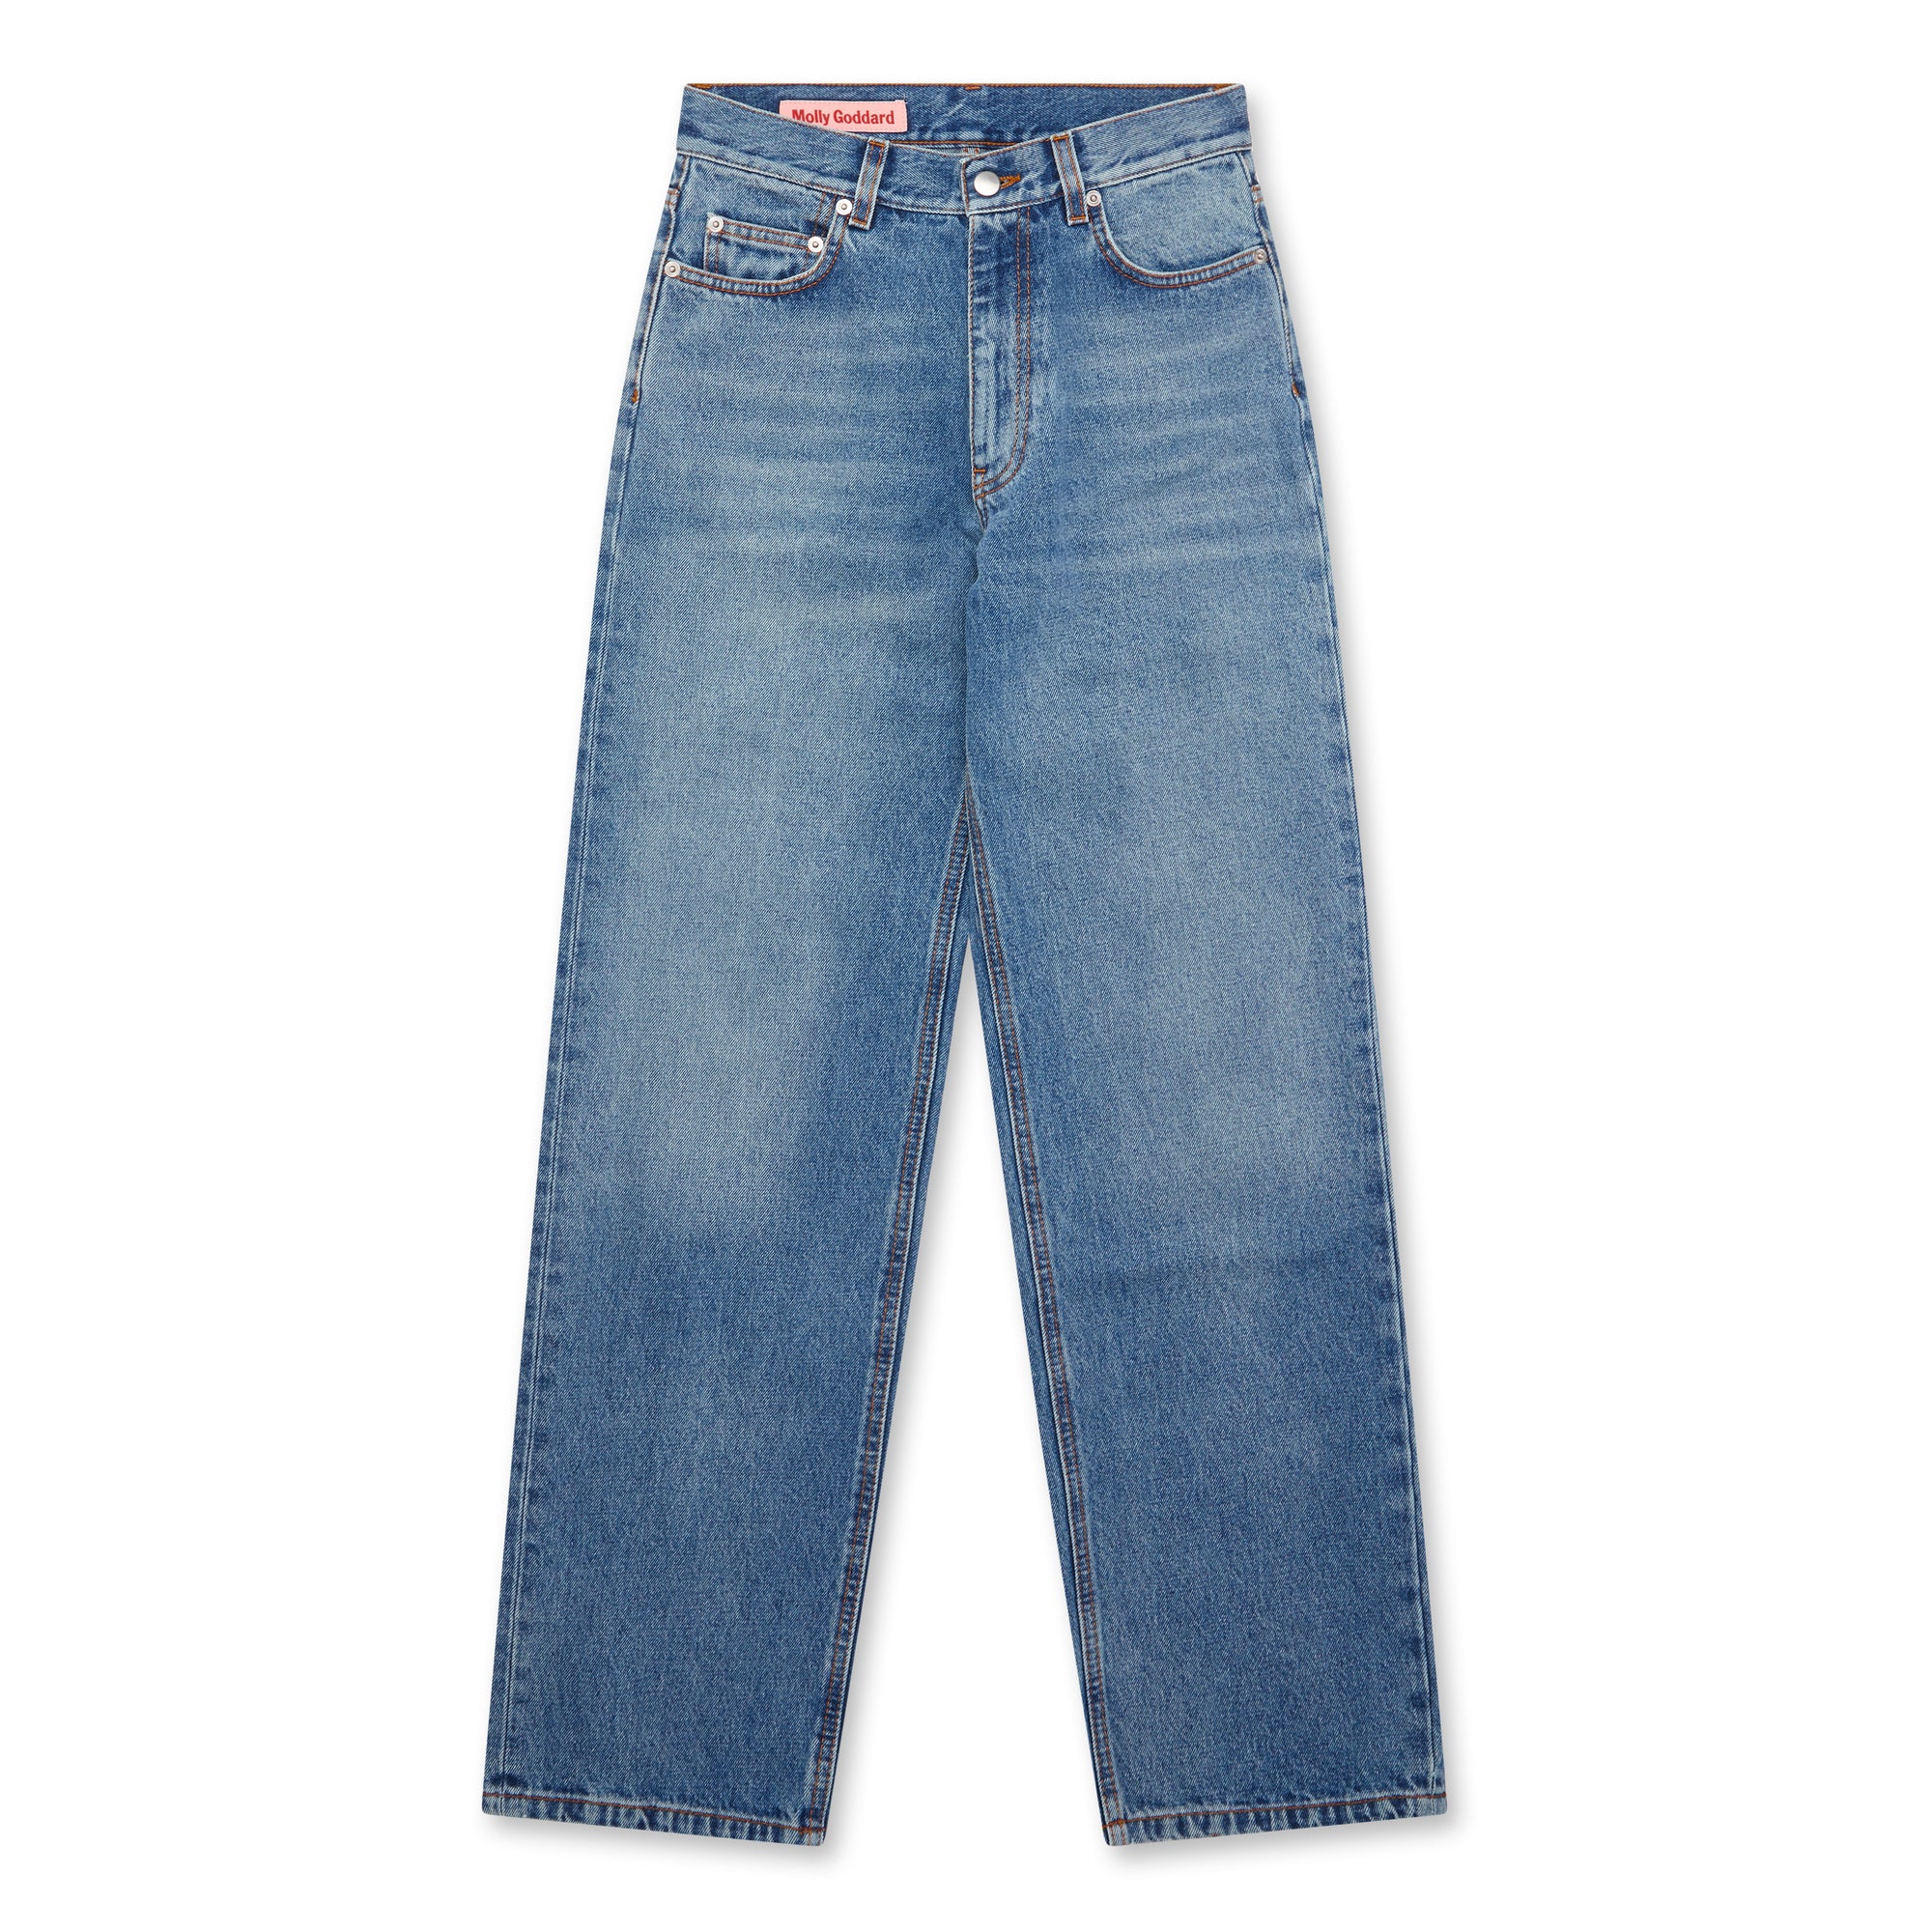 Molly Goddard - Women’s Lily Jeans - (Blue Wash) view 1